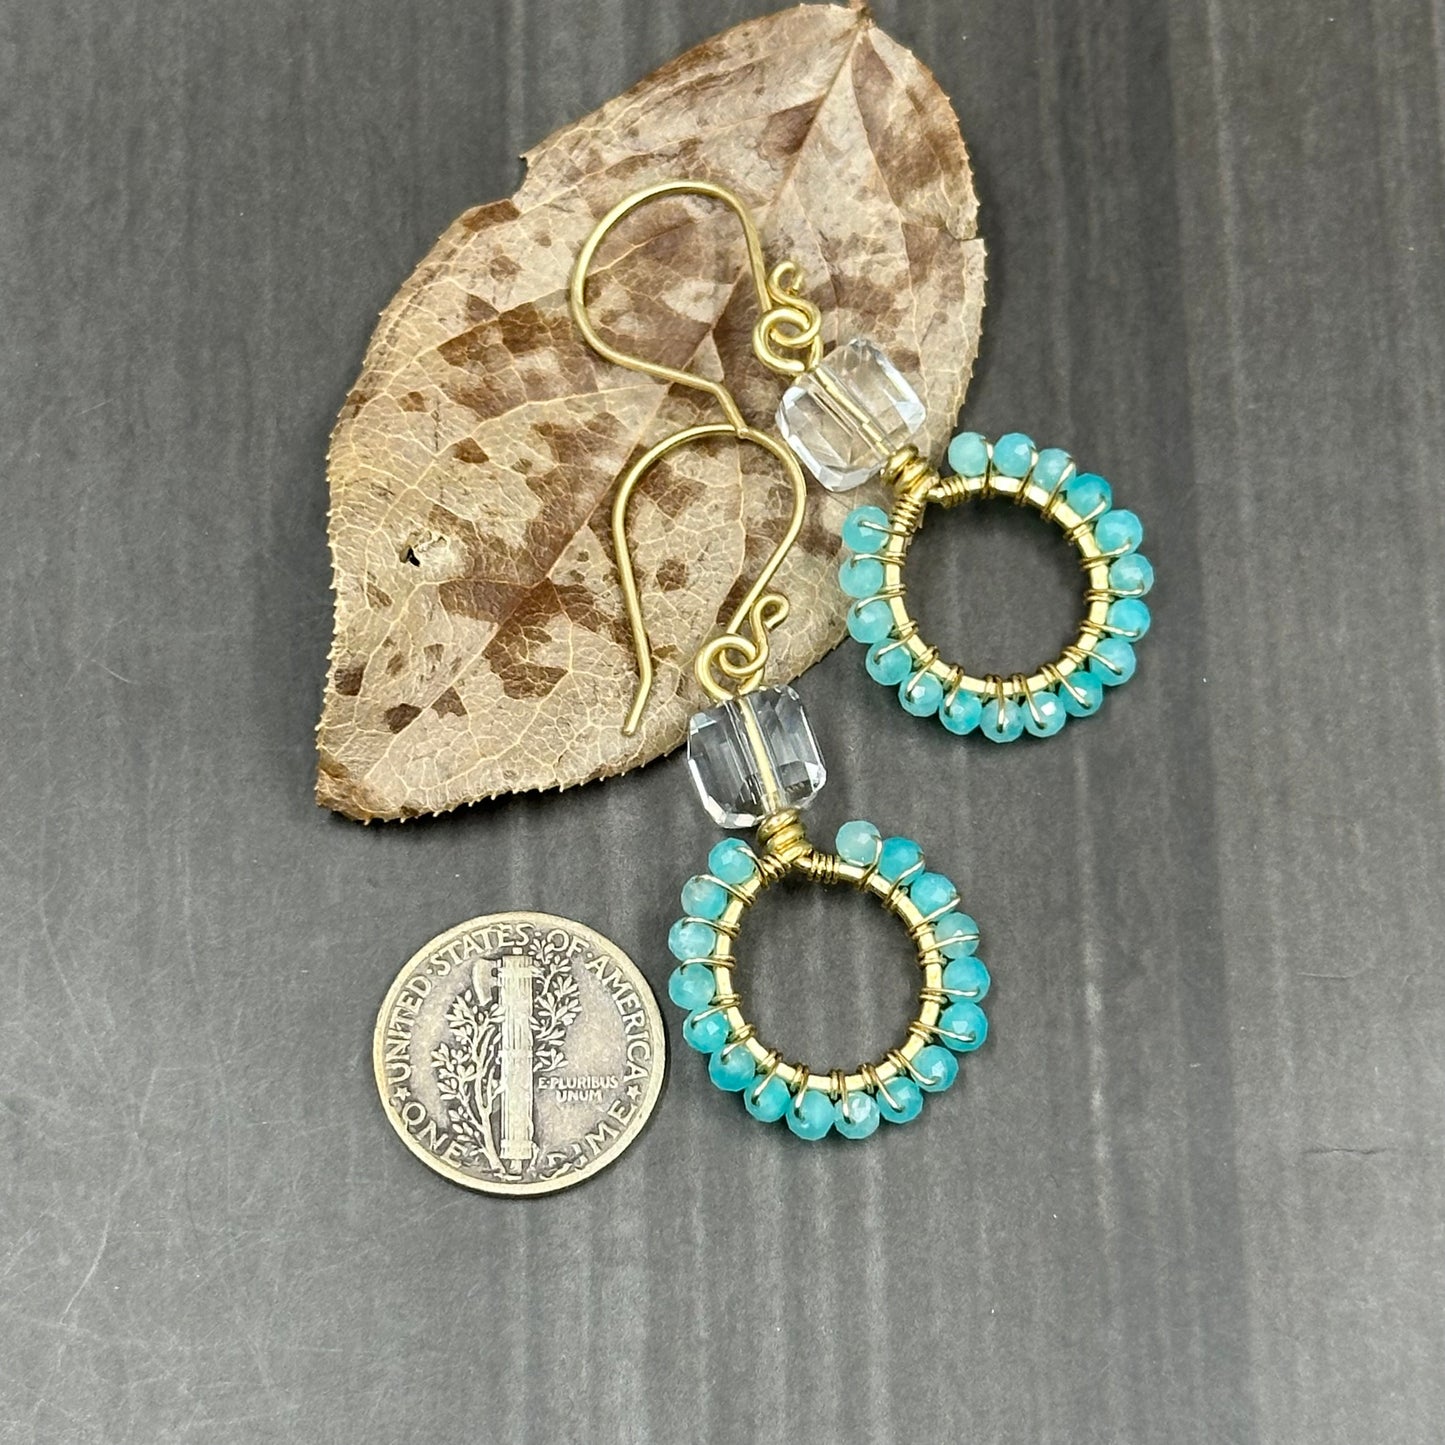 Red Brass hoop earrings with Peruvian Amazonite and czech glass